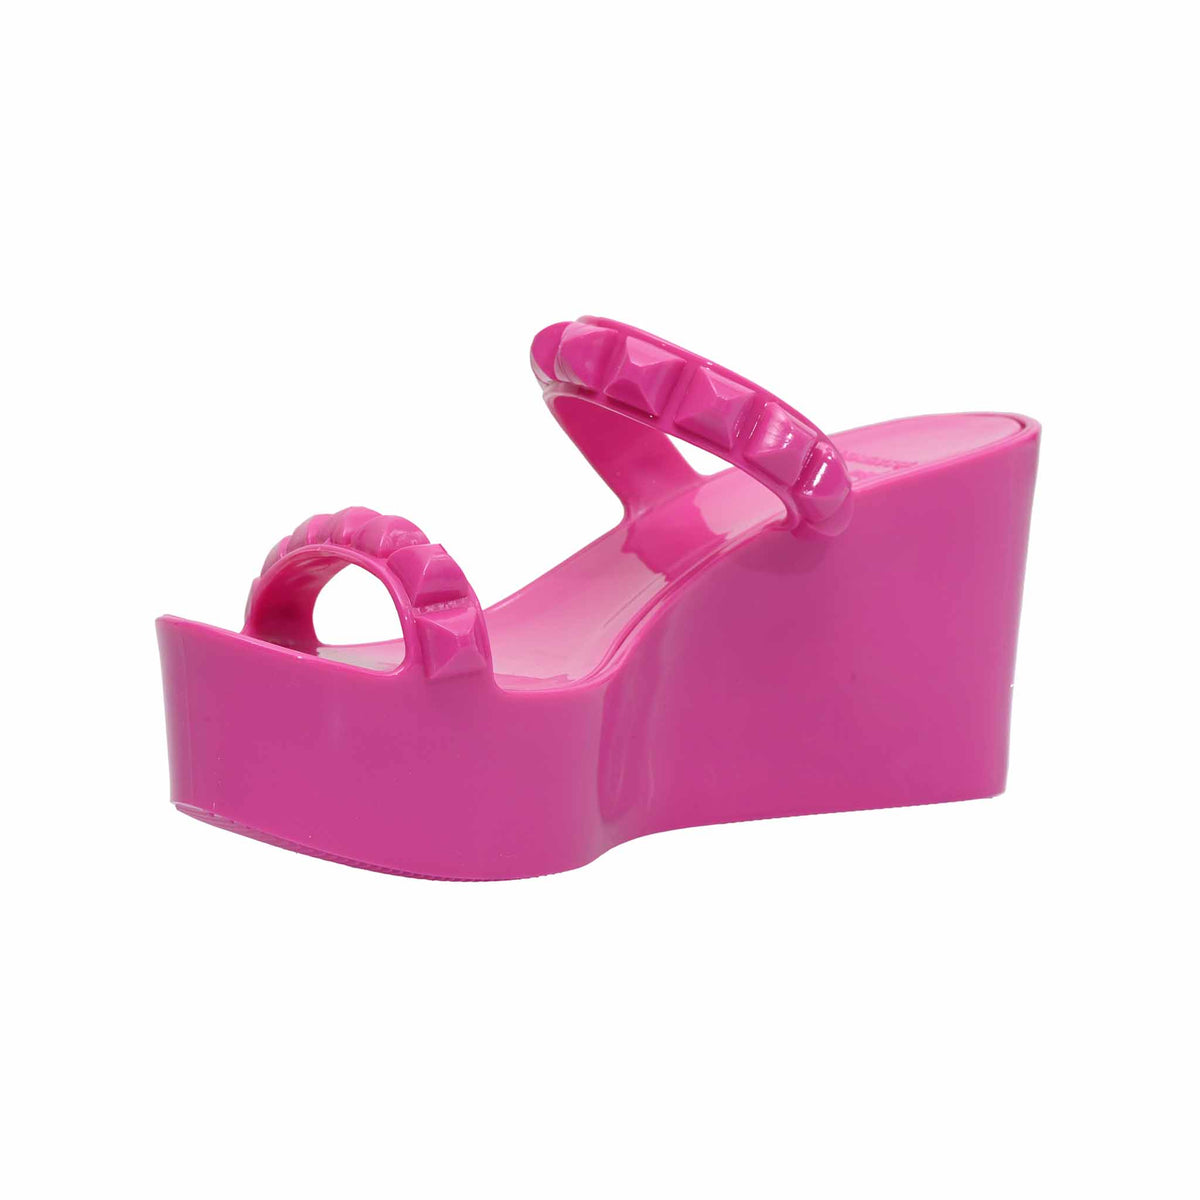 jelly wedge, high heels, platform shoes for women